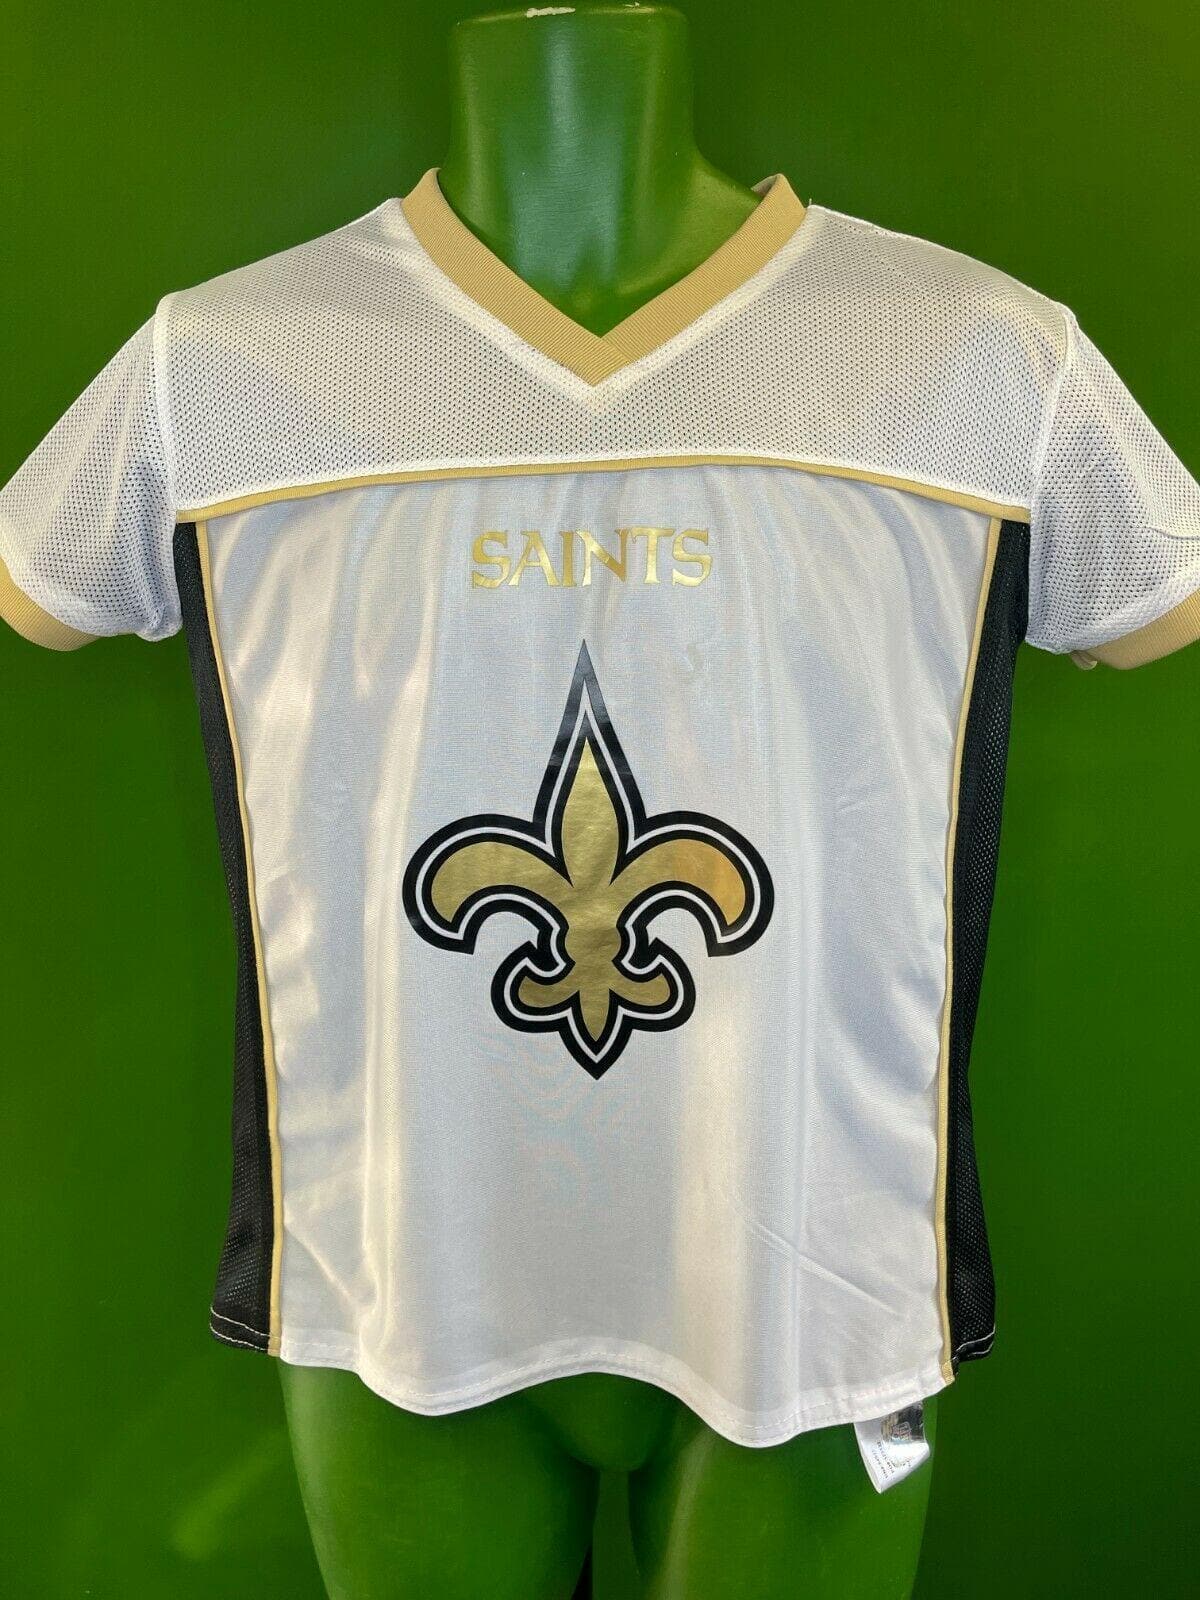 NFL New Orleans Saints Reversible Flag Football Jersey Youth Large 14-16